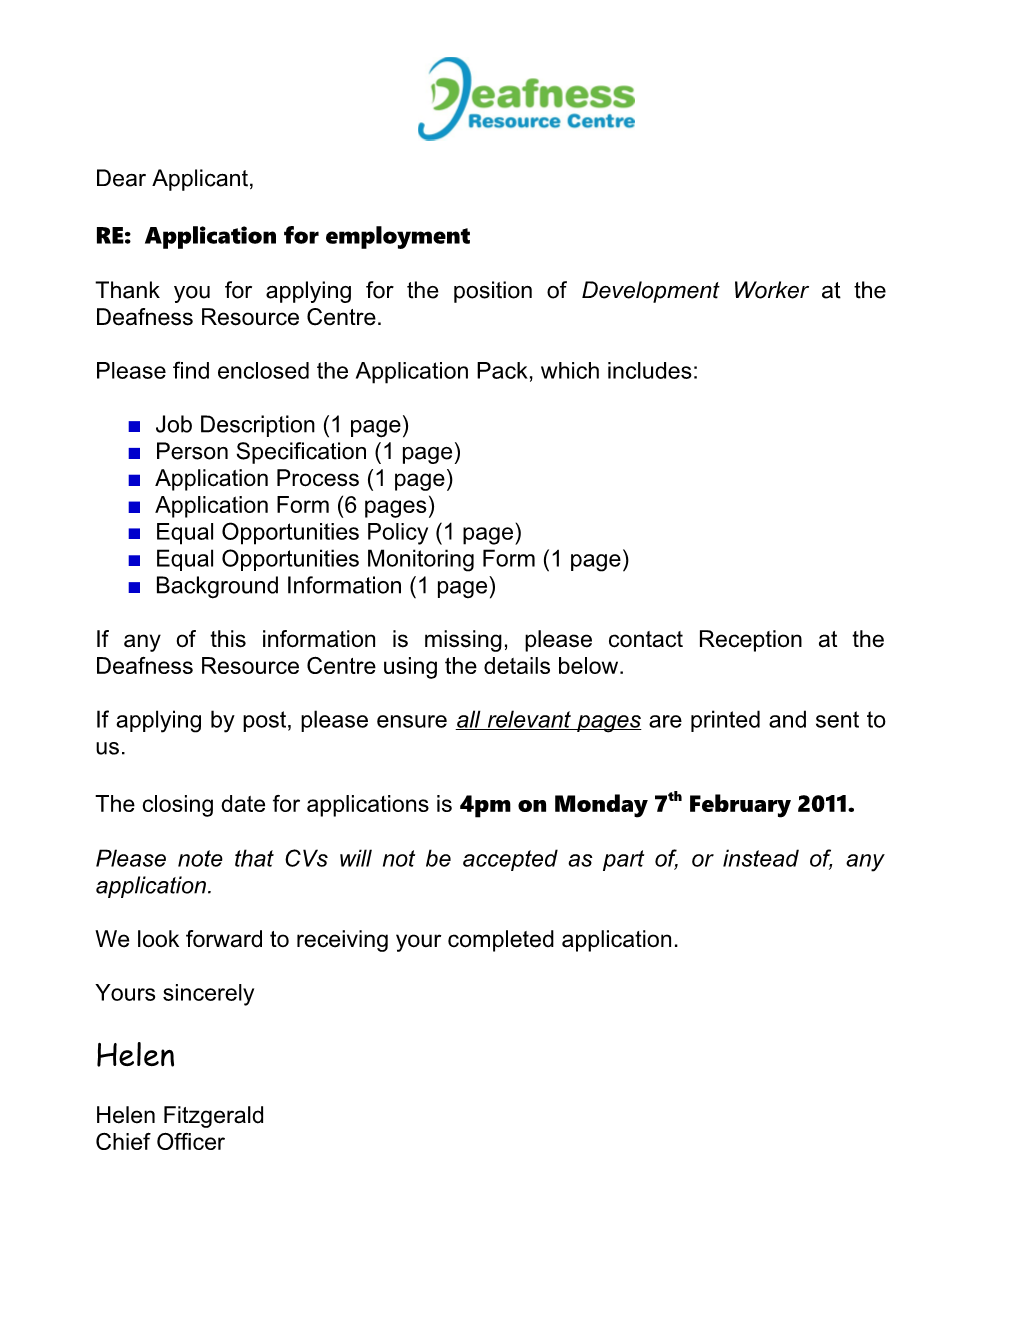 RE: Application for Employment